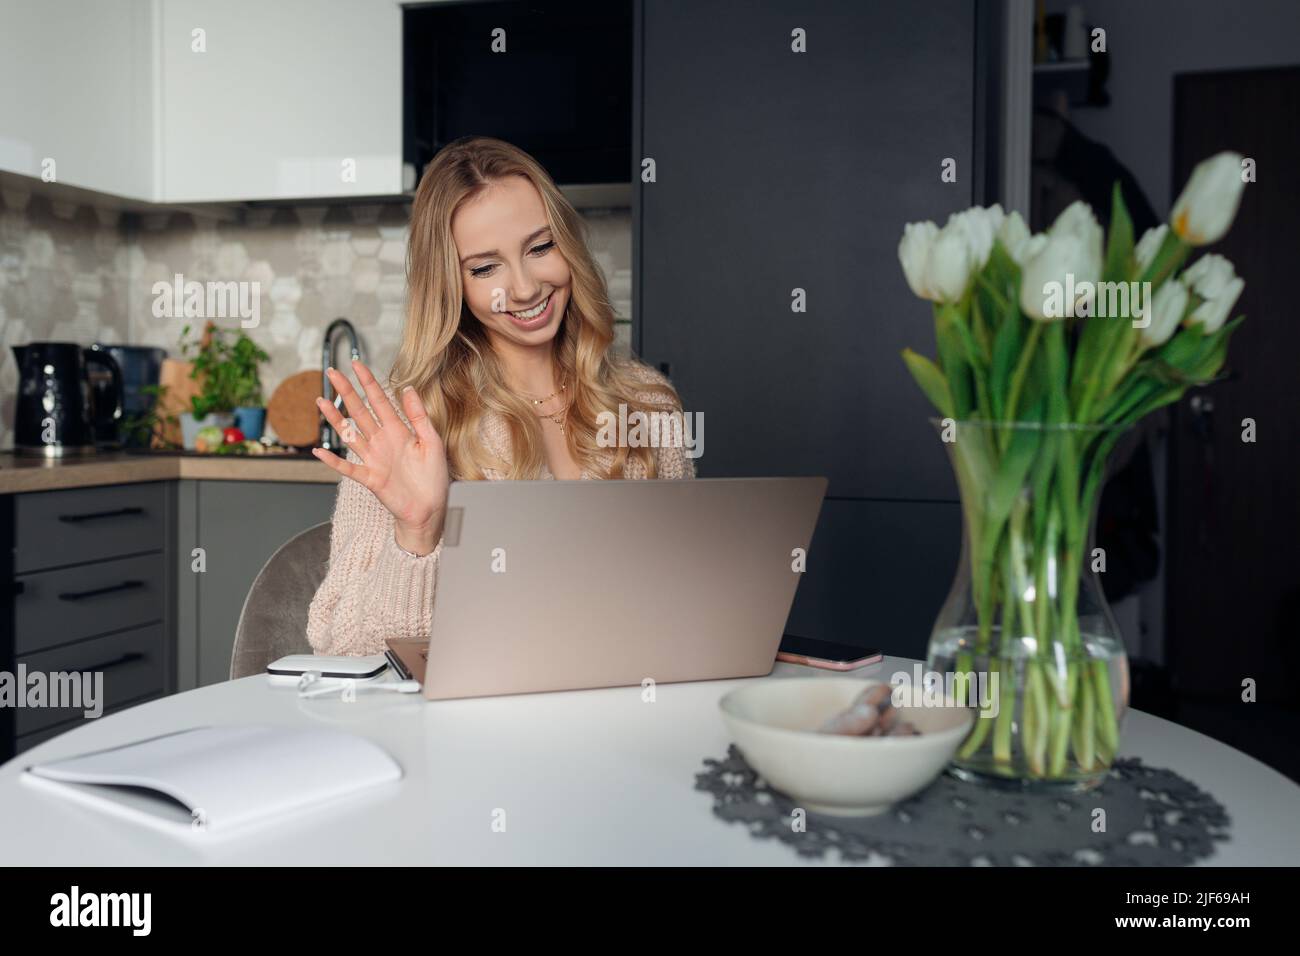 Feminine blonde in knitted jacket smiles happily, greeting her interlocutor with her hand when communicating online.  Stock Photo